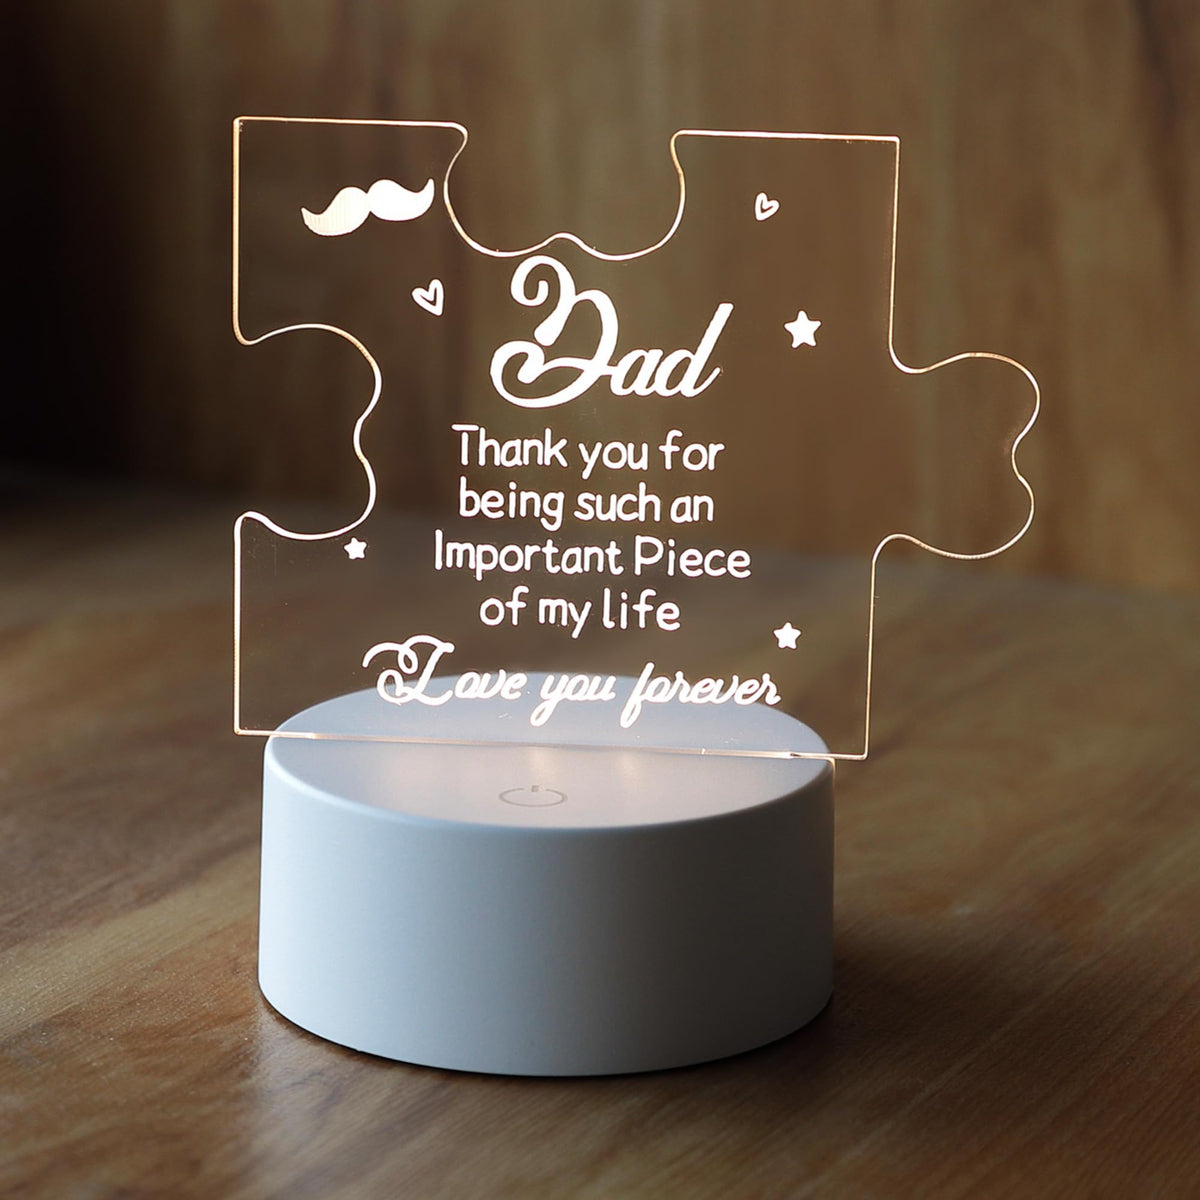 Gleevers Acrylic Plaque with Stand LED Light | Engraved Birth Day Gift for Father Grand Father | Retirement Day Gift for Dad | Father's Day Acrylic Night Light | 1Pc